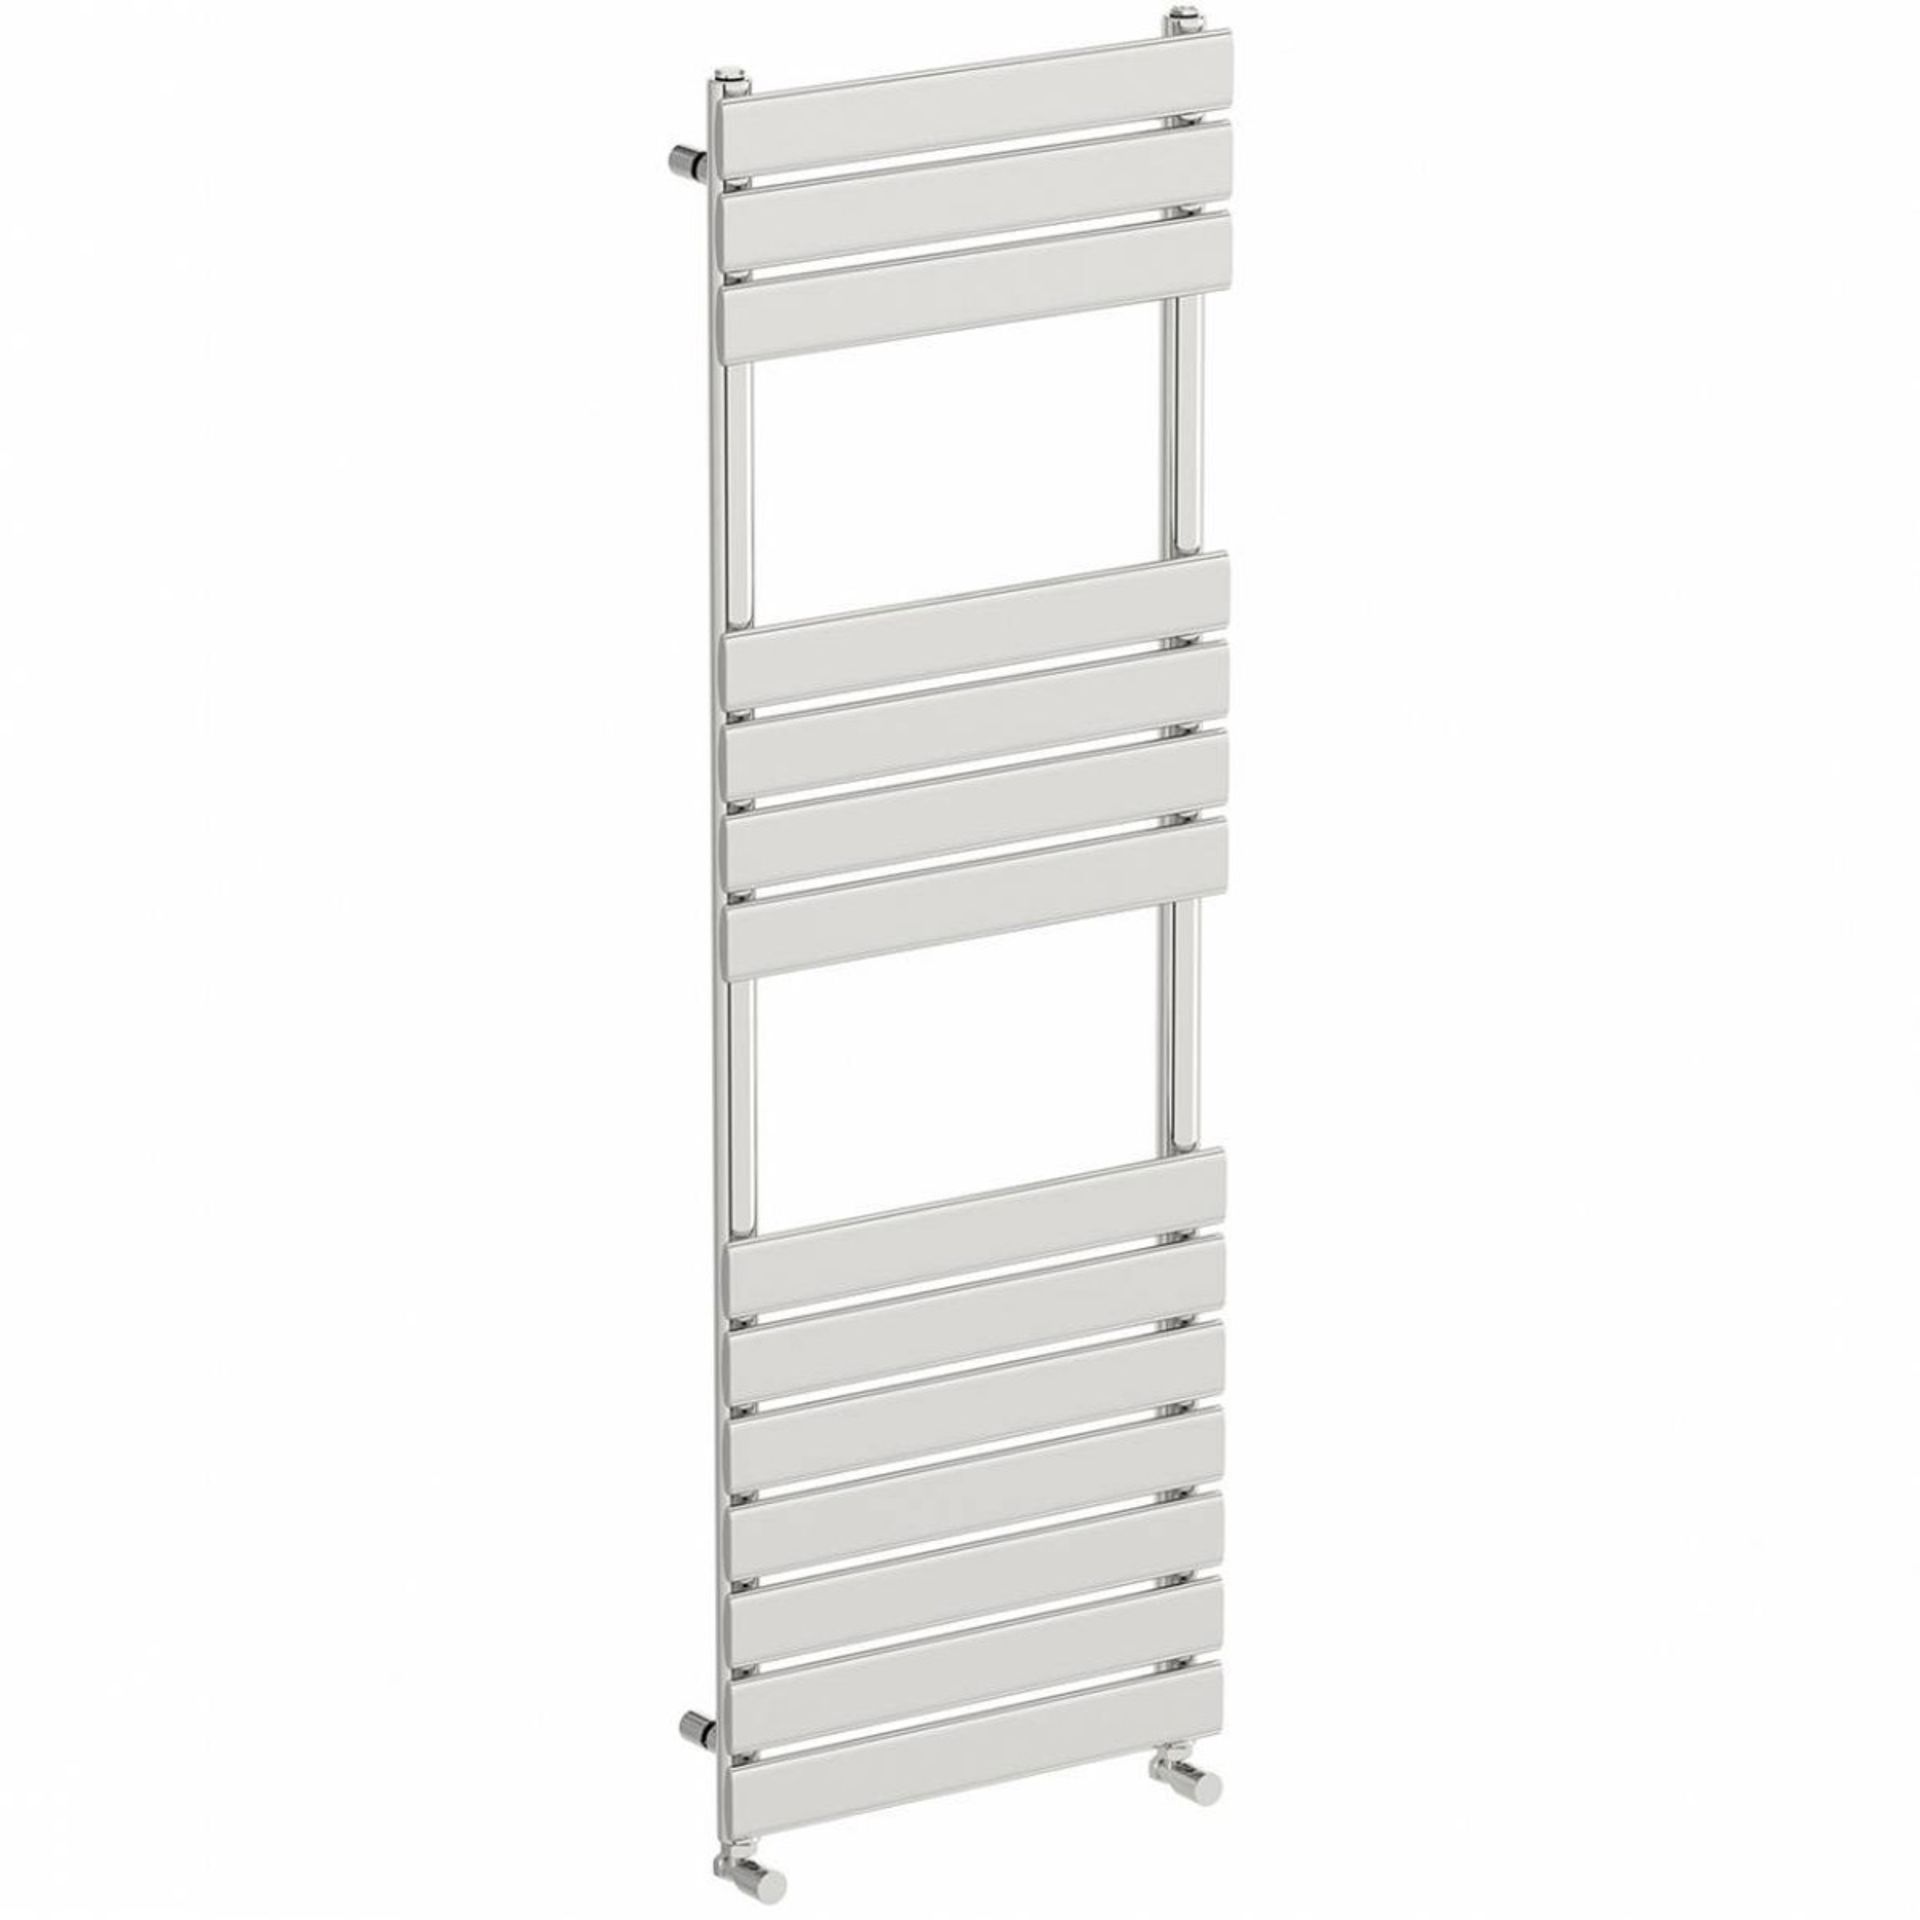 1 x Signelle Heated Towel Rail Radiator (TW04)  - Unused Sealed Stock - Size: 1500 x 500mm - CL190 - - Image 3 of 9